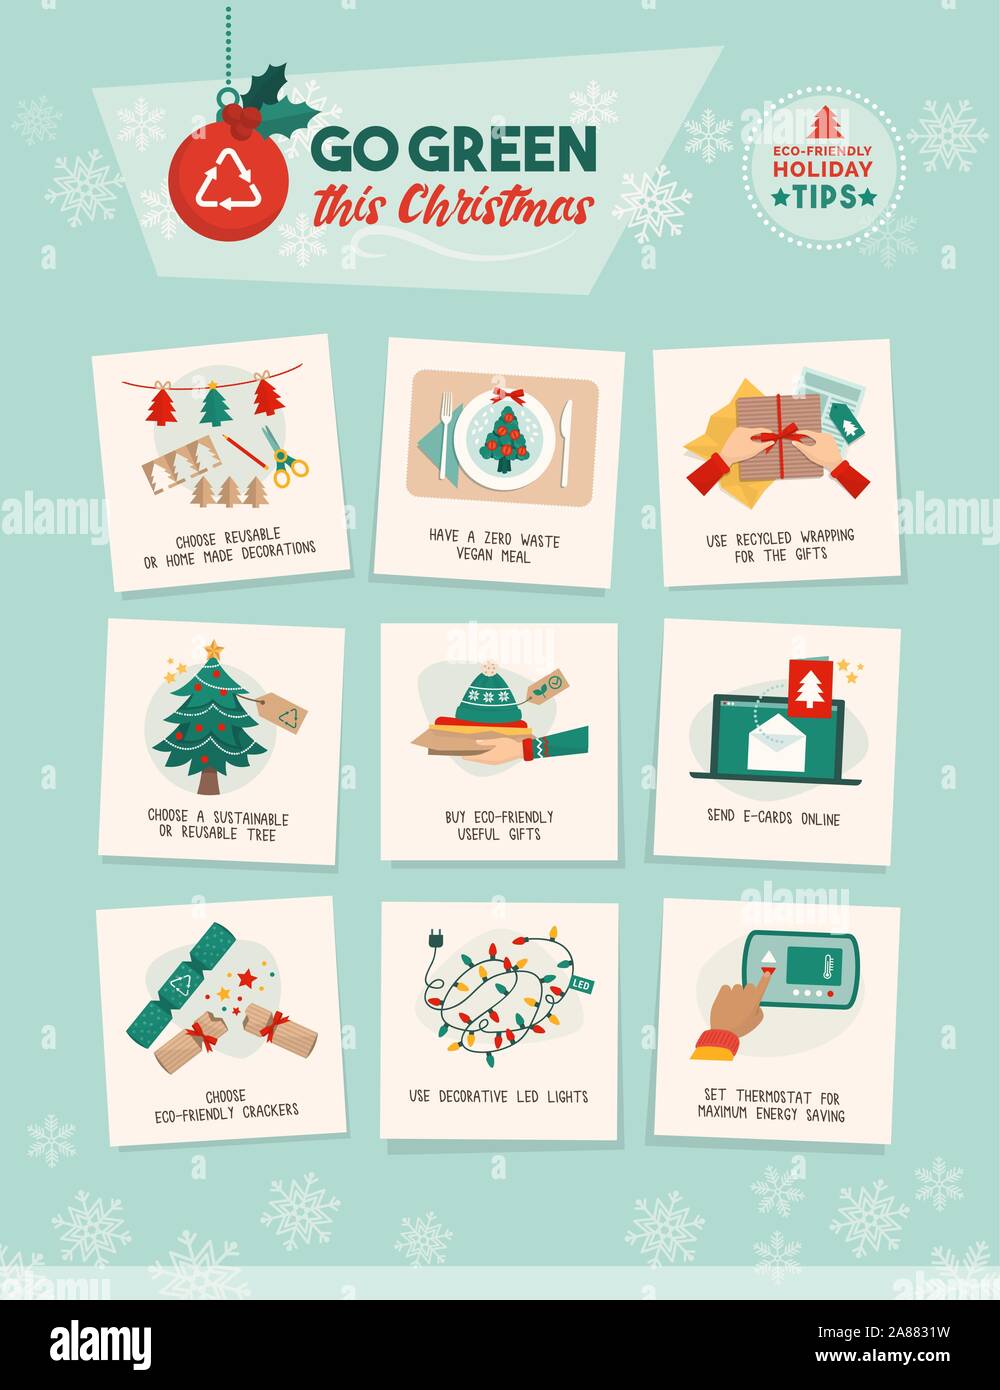 Go green this Christmas: how to have a sustainable eco-friendly holiday at home vector infographic with easy tips Stock Vector